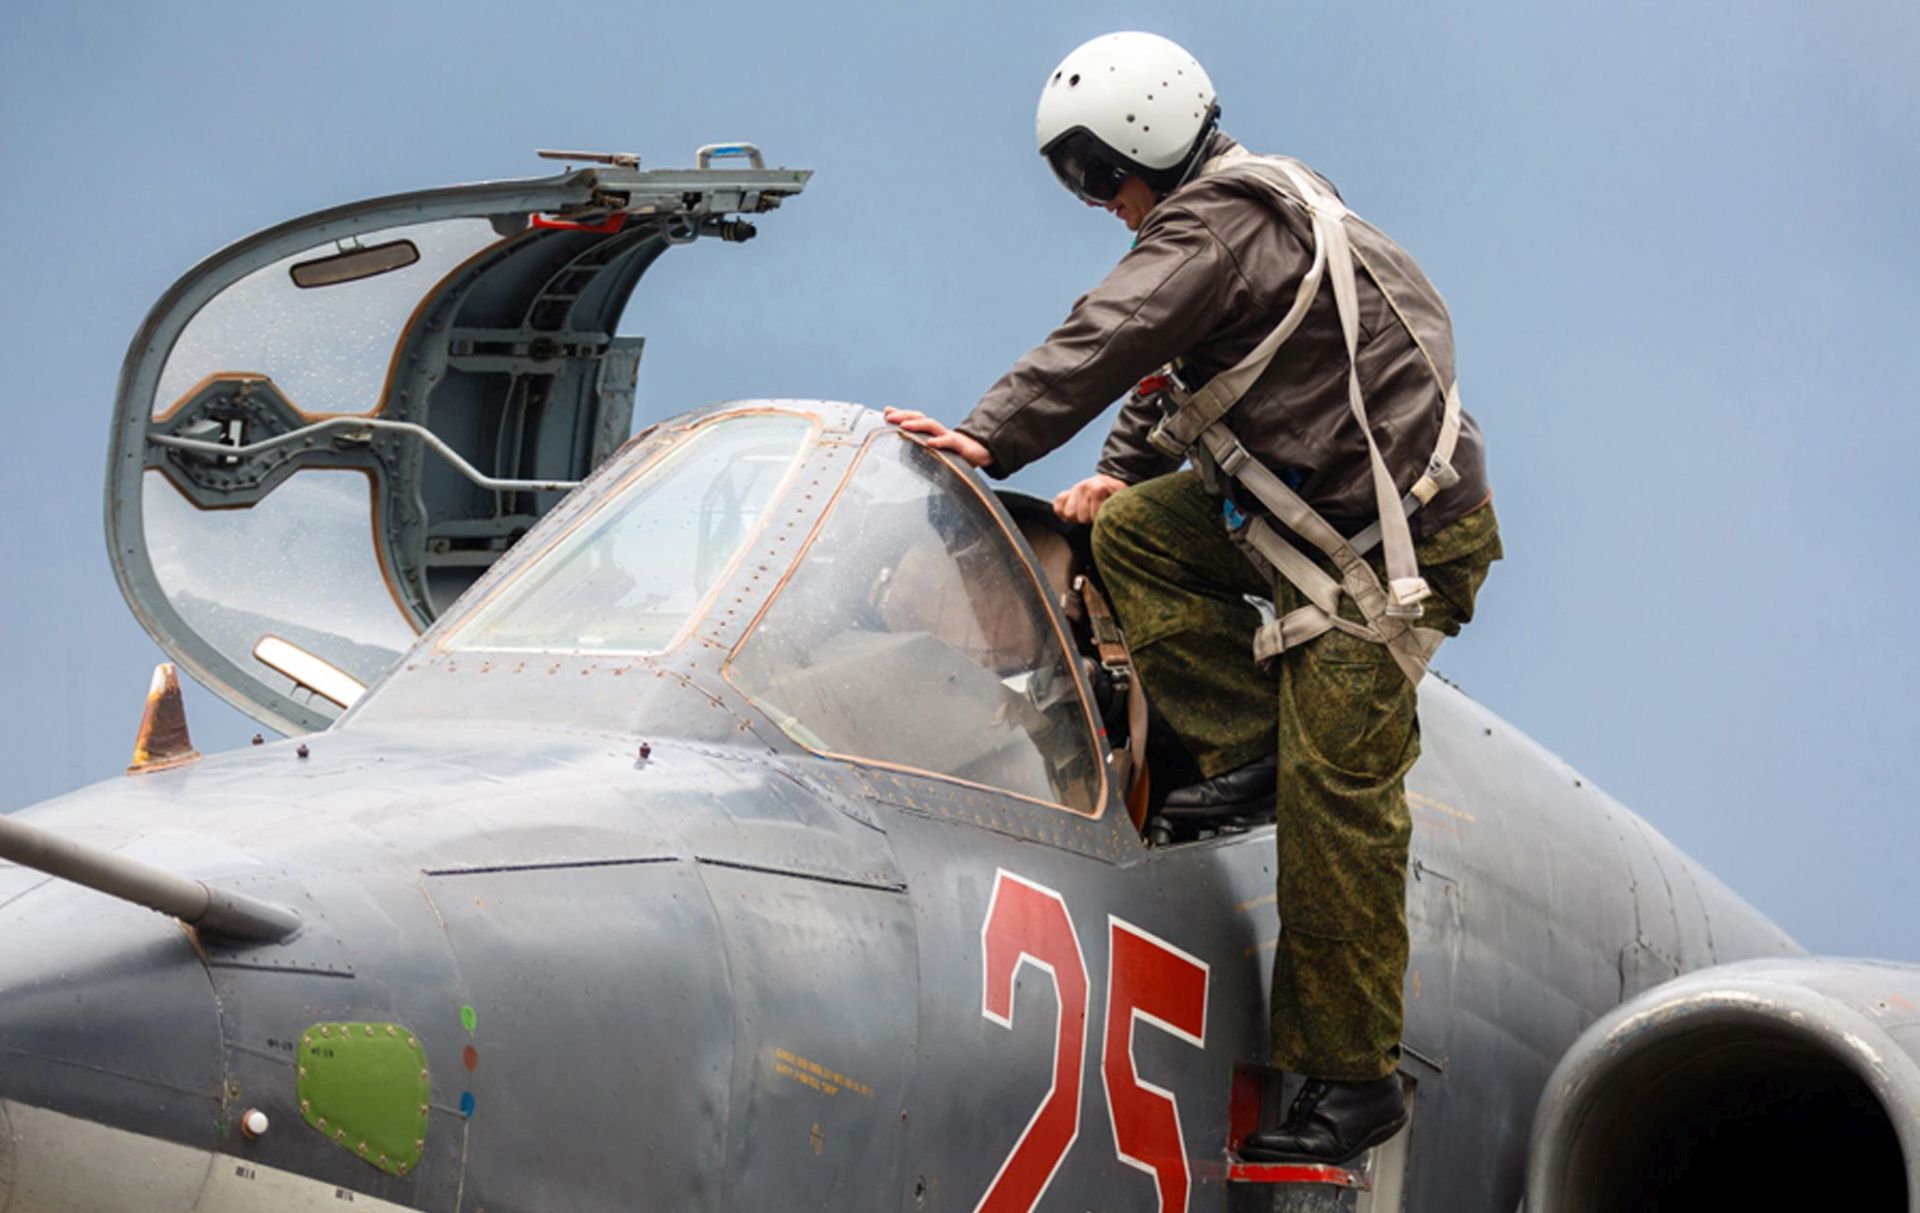 epa05214477 A handout picture made available on the official website of the Russian Defence Ministry shows Russian pilot getting inside a SU-25 strike fighter before the take-off at the Syrian Hmeymim airbase, outside Latakia, Syria, 16 March 2016. Russian warplanes leave the Hmeymim airbase for permanent location airfields in Russia following the order of Russian President Vladimir Putin to withdraw the majority of Russian troops from Syria.  EPA/VADIM GRISHANKIN/RUSSIAN DEFENCE MINISTRY